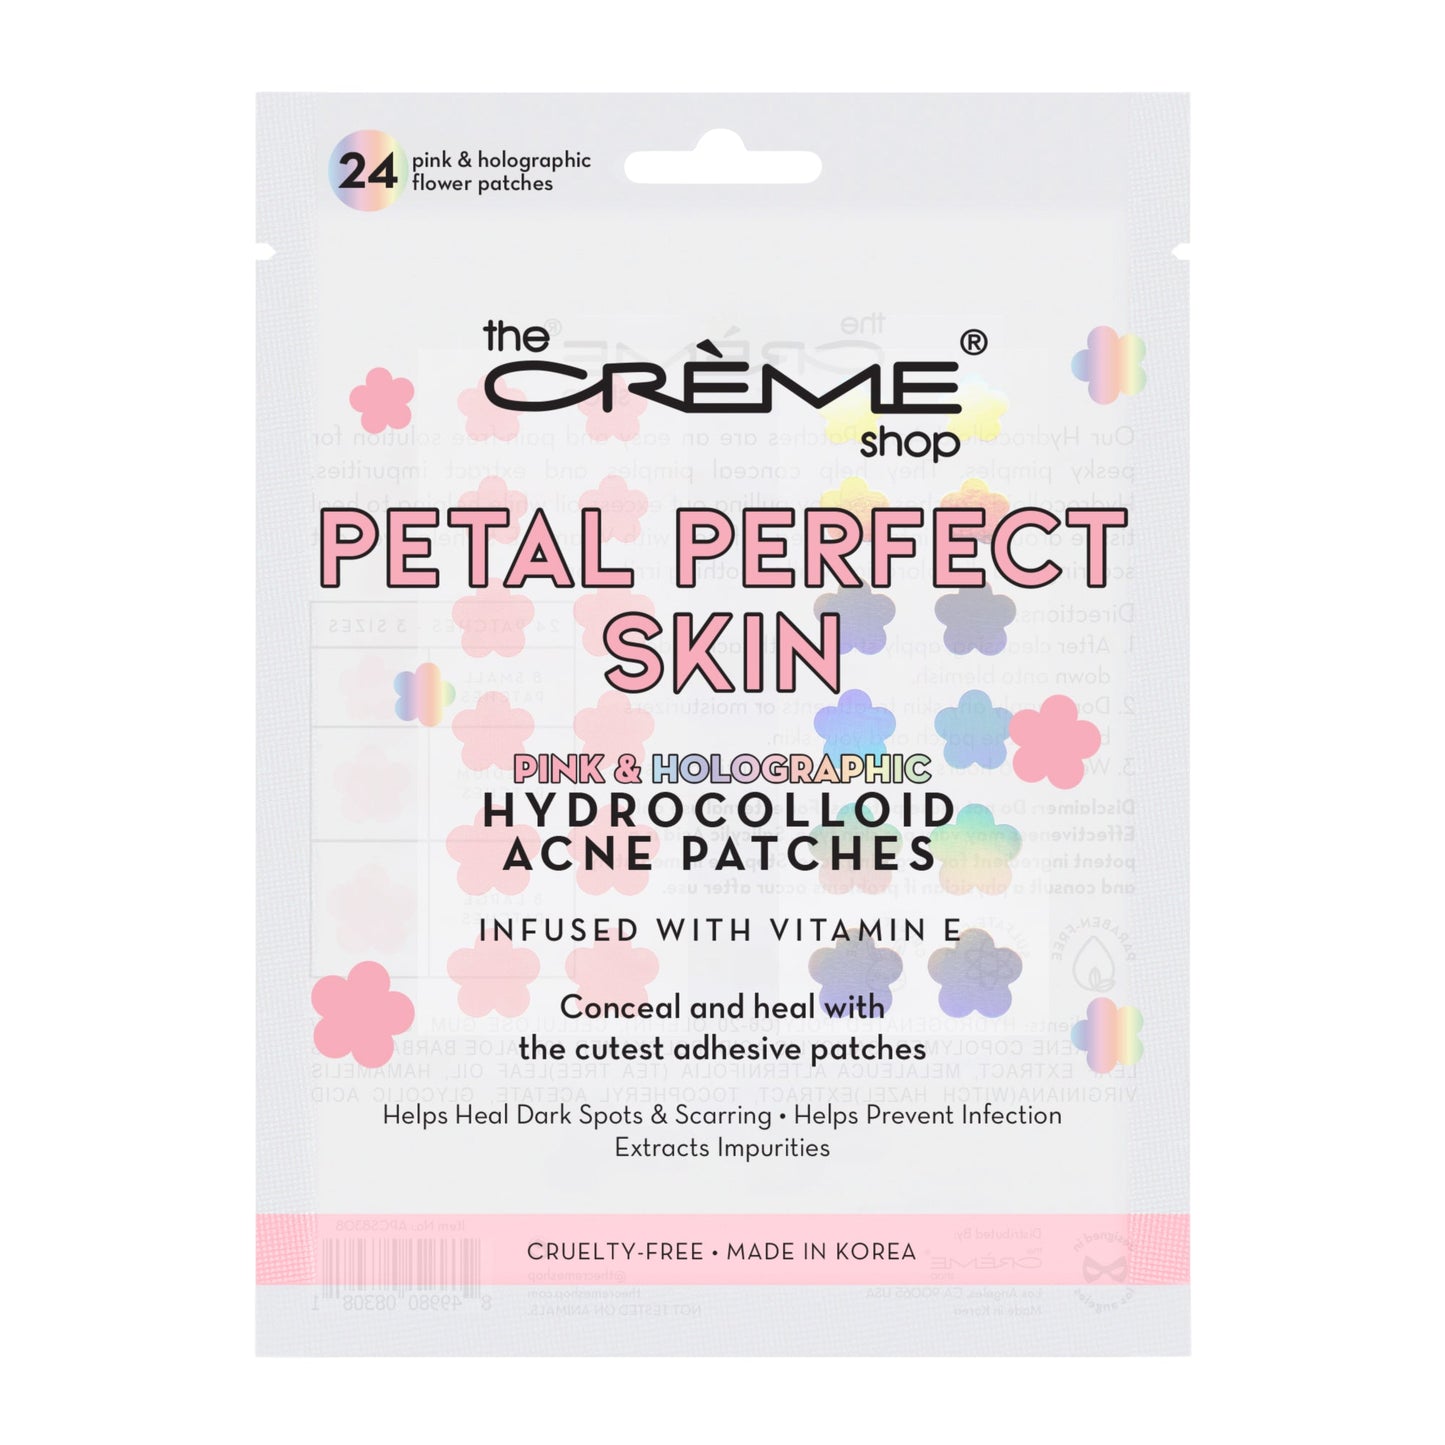 Petal Perfect Skin - Hydrocolloid Acne Patches | Pink & Holographic Hydrocolloid Acne Patches The Crème Shop Single 